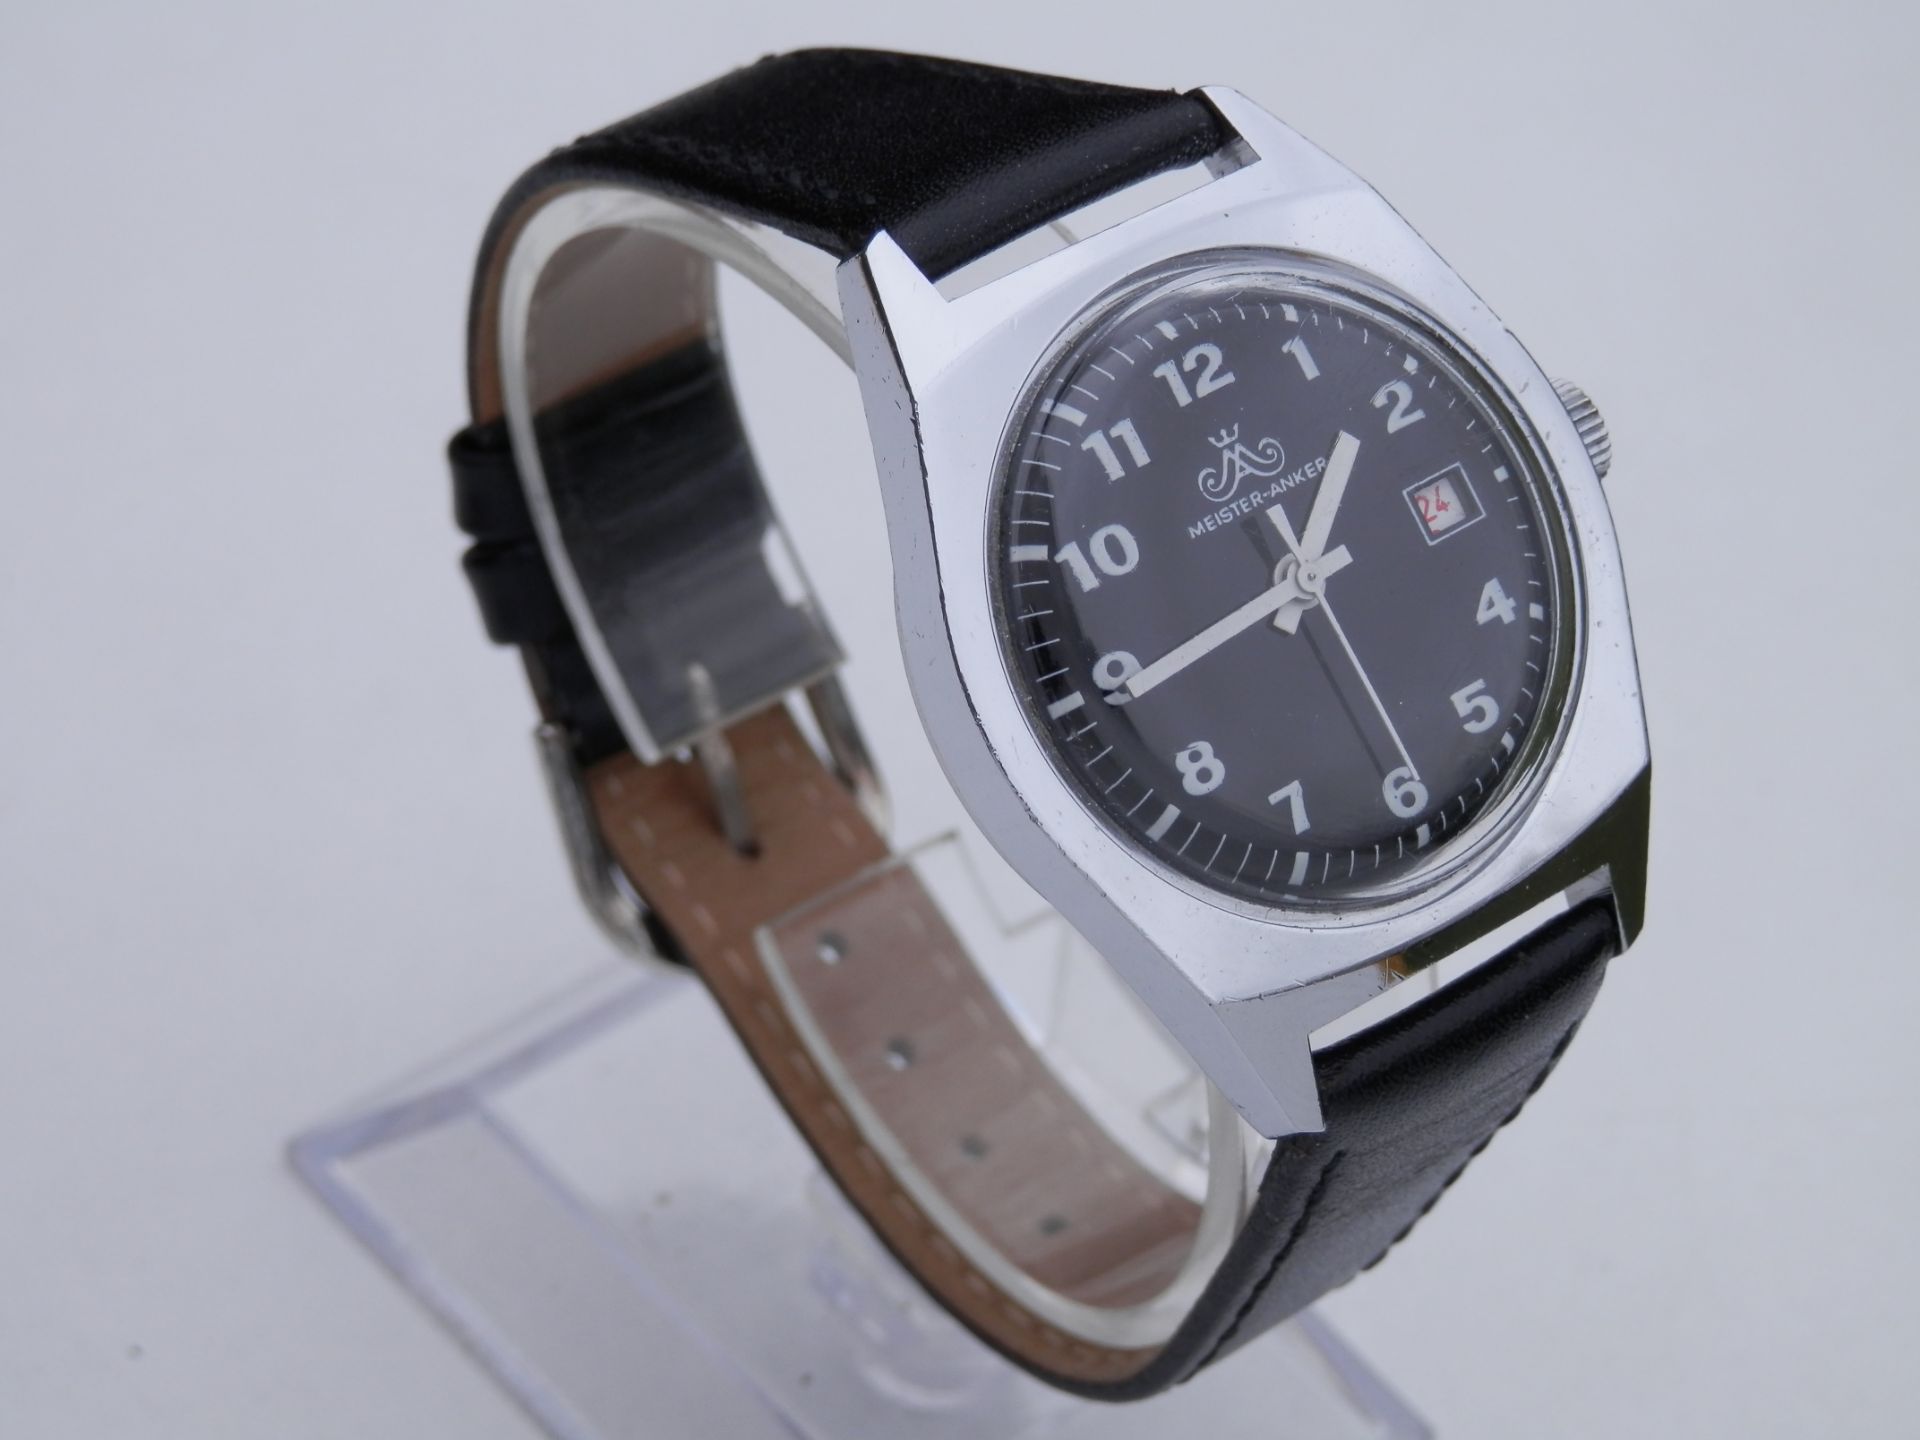 SUPERB RARE GENTS 1960S GERMAN MADE MEISTER ANKER HAND WIND DATE WATCH. - Image 3 of 10